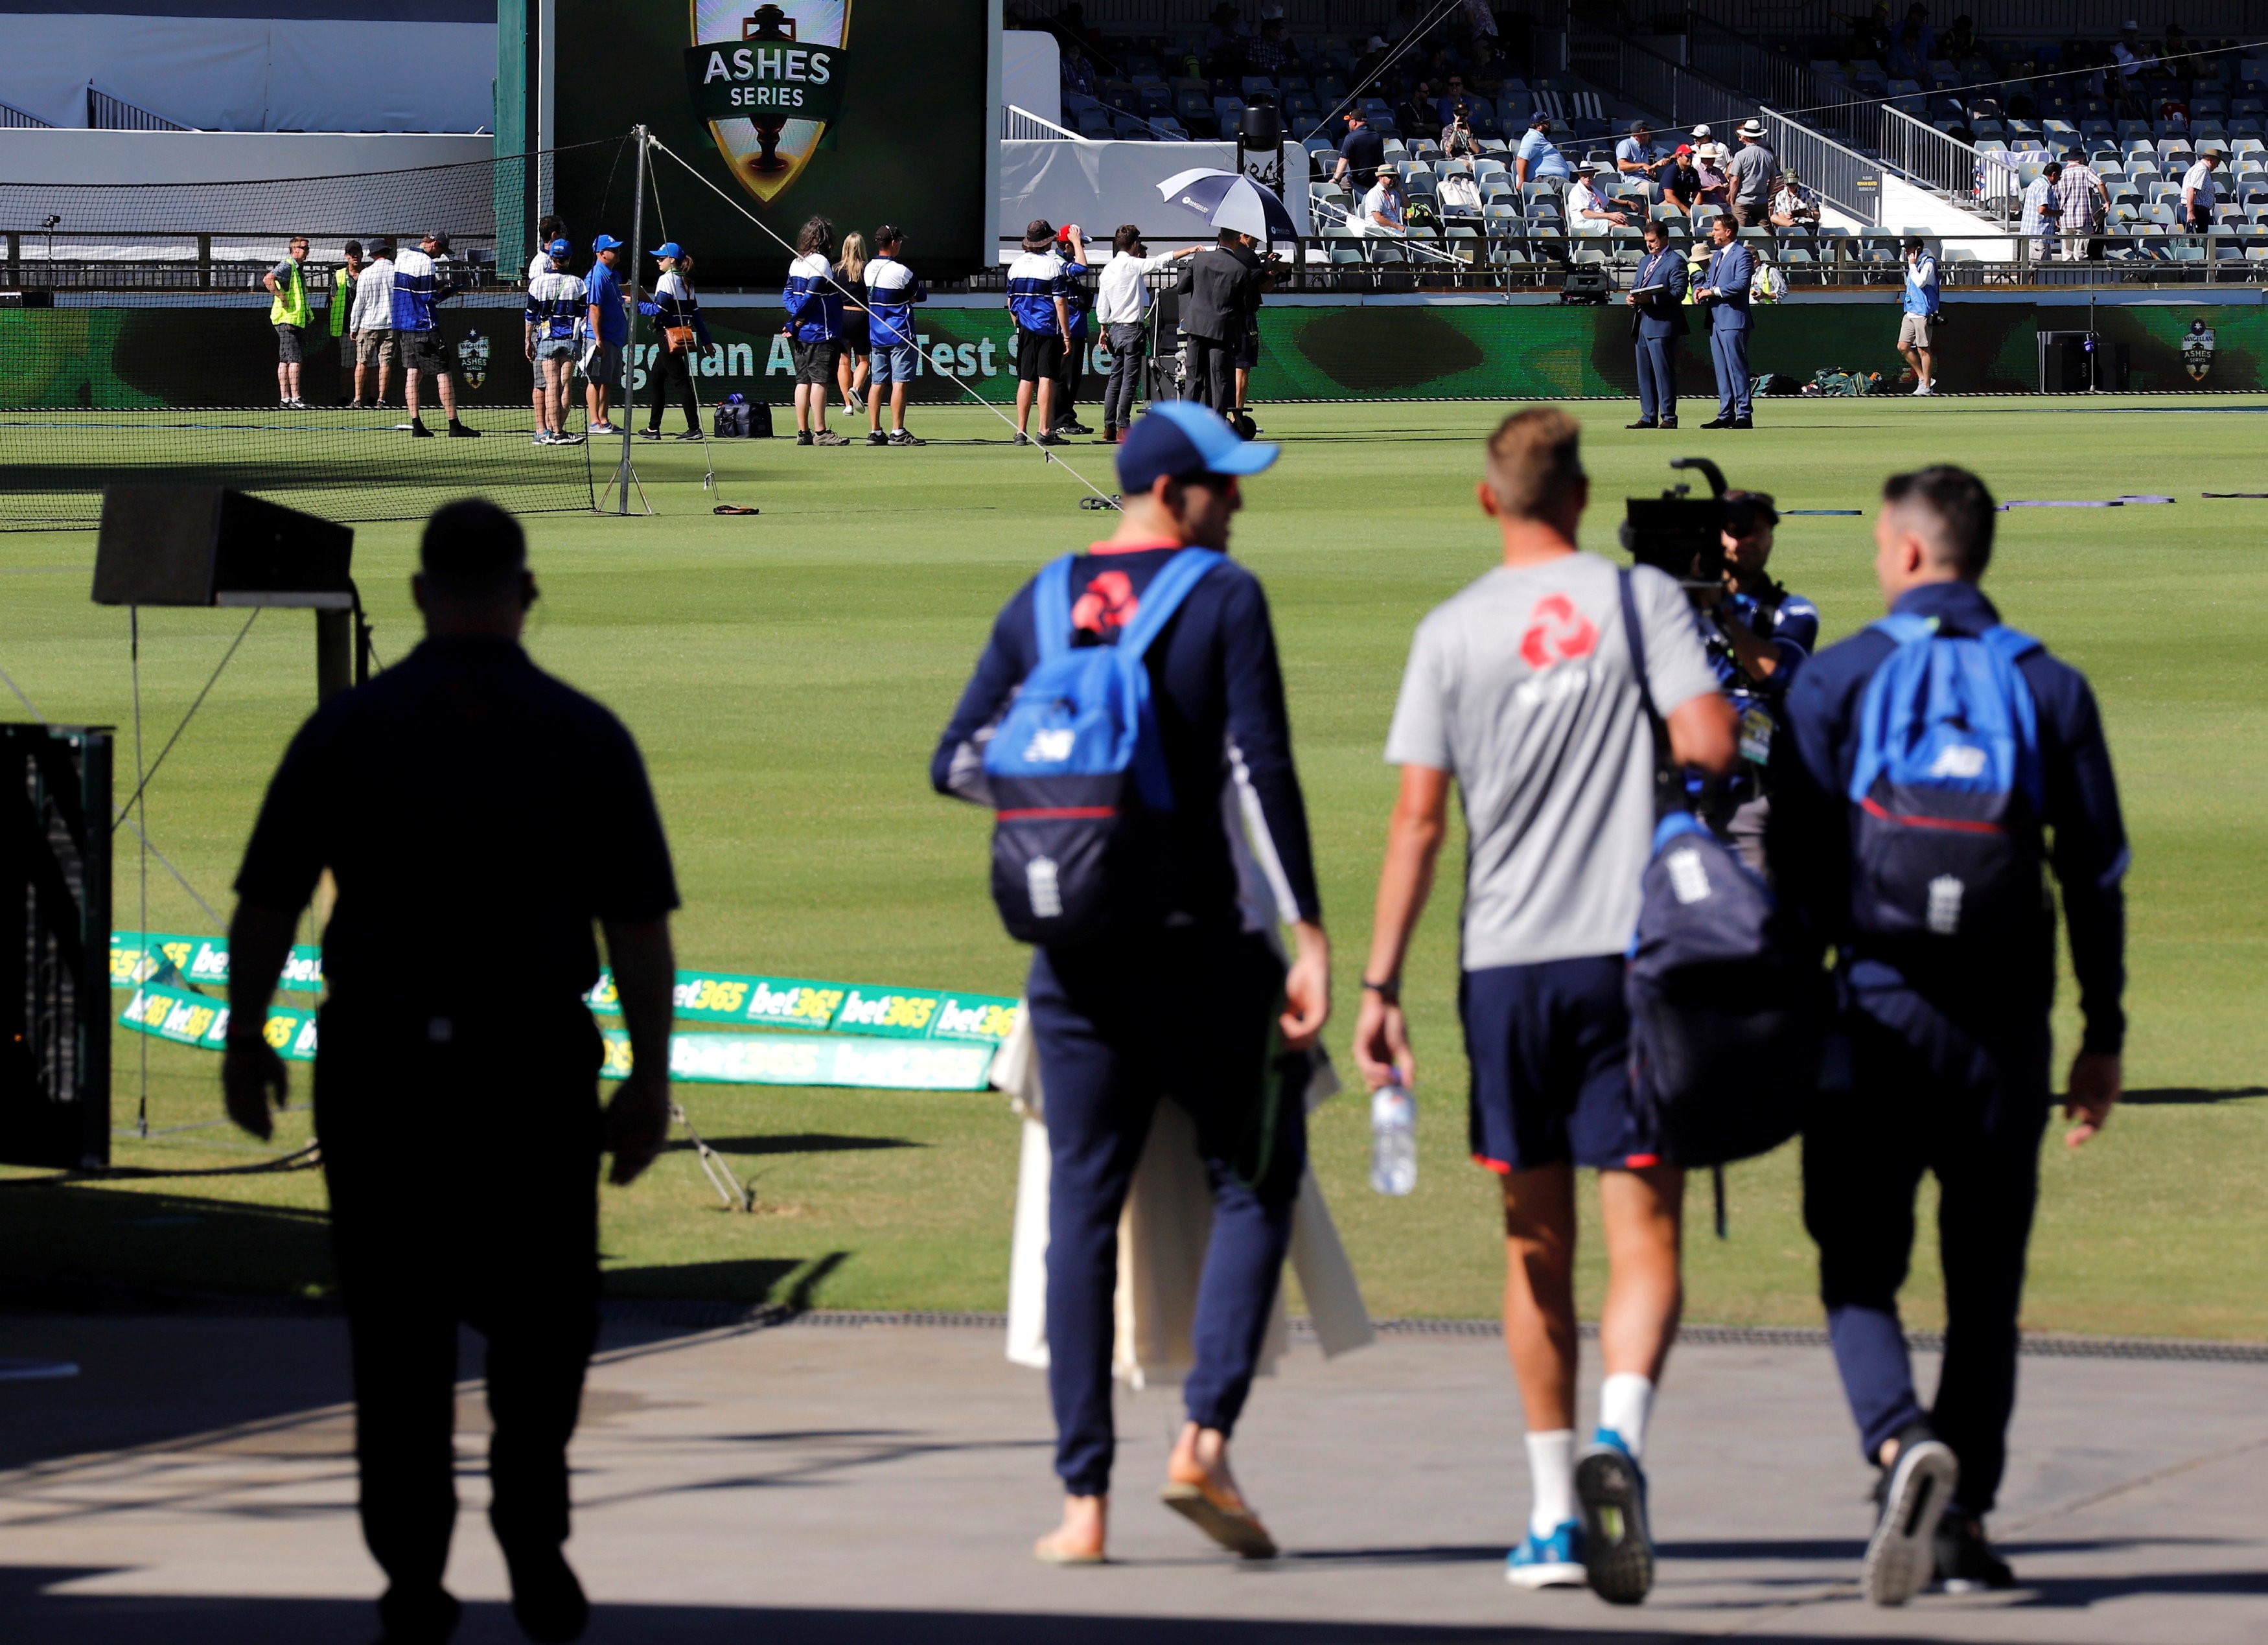 England players James Anderson and Stuart Broad walk out onto the WACA ahead of the third Ashes test against Australia. Photo: Reuters